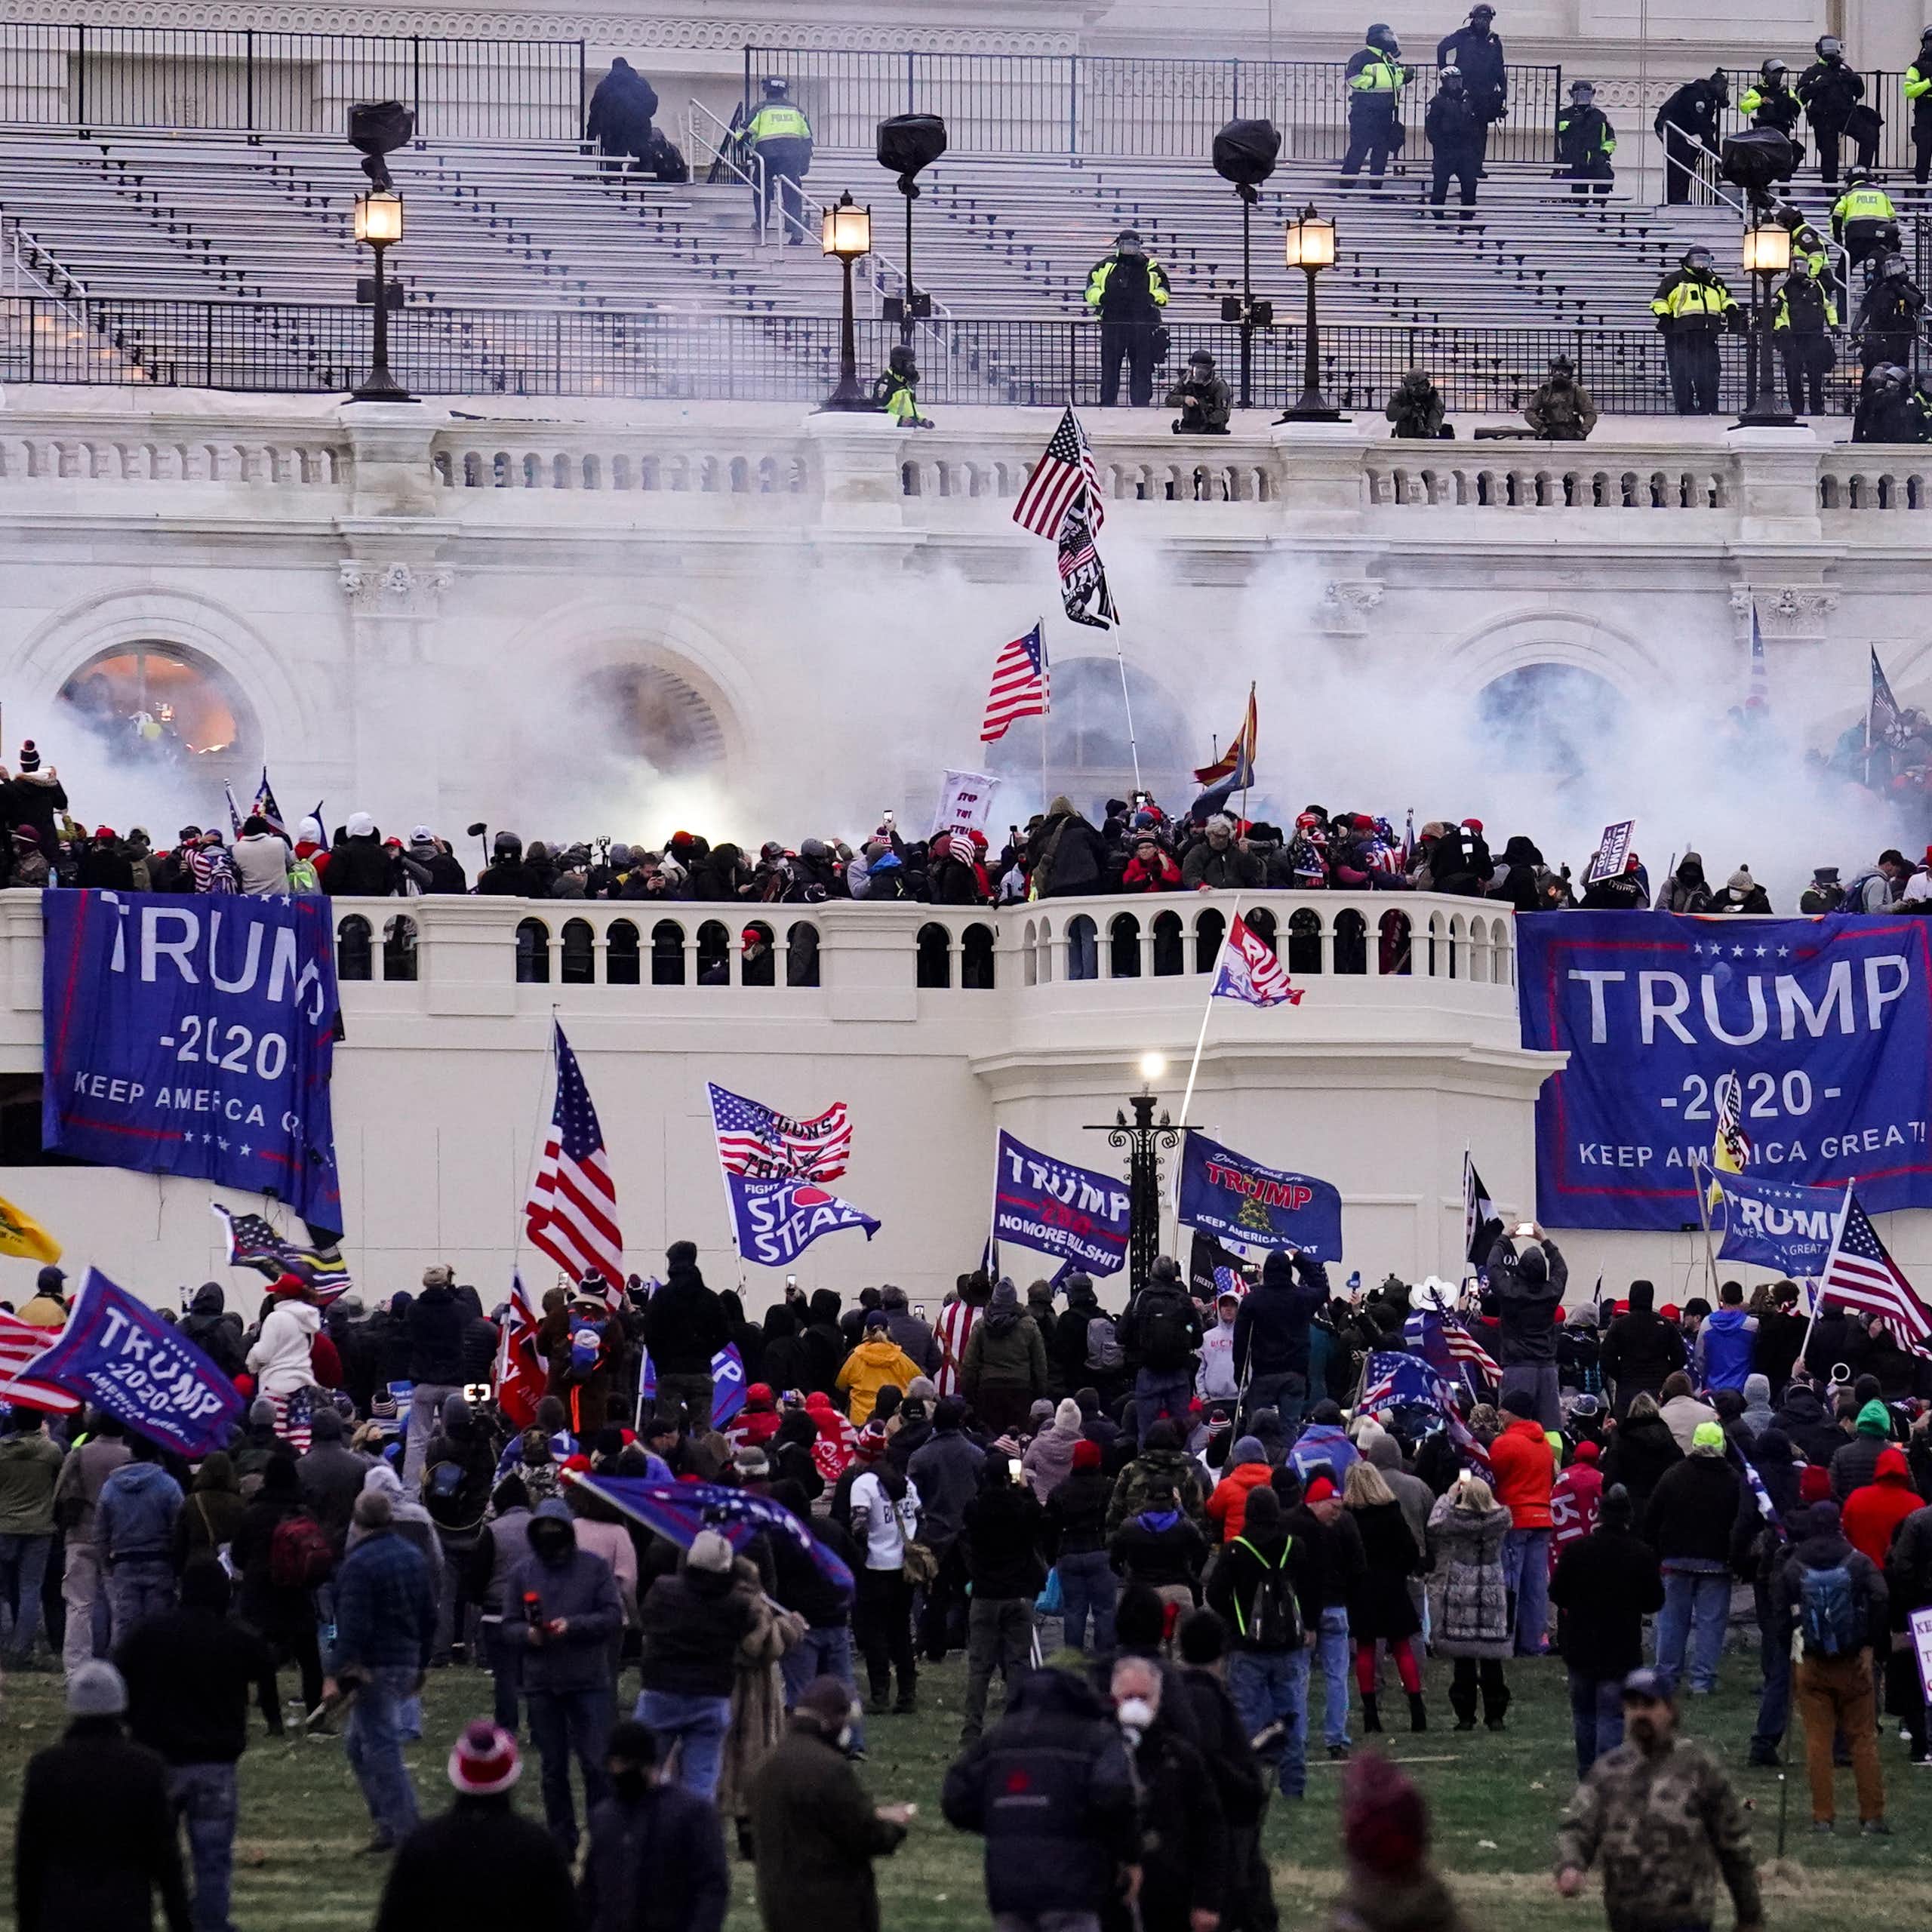 Supreme Court makes prosecution of Trump on obstruction charge more difficult, with ruling to narrowly define law used against him and Jan. 6 rioters